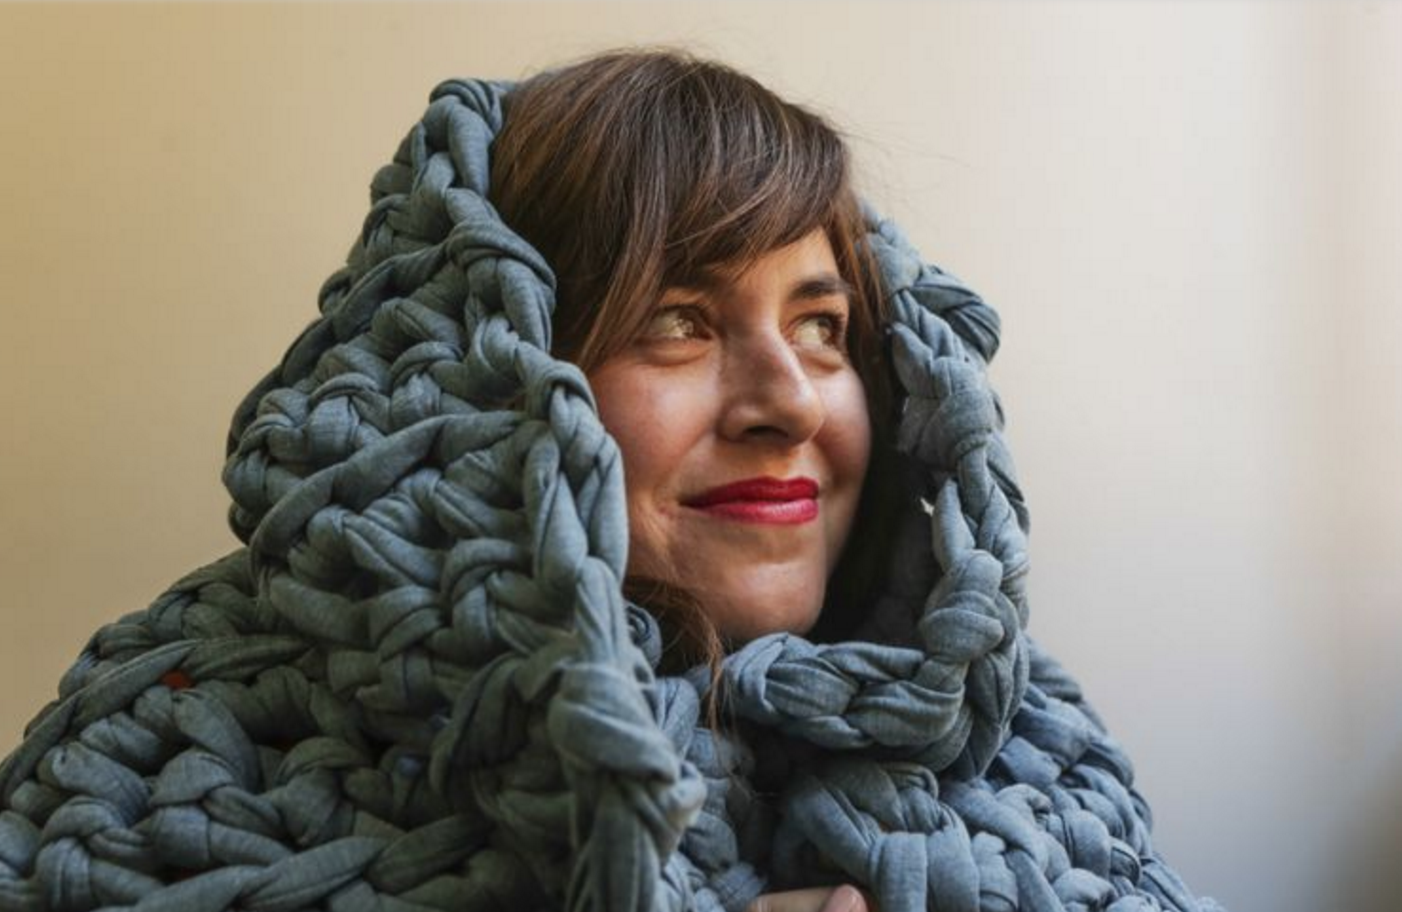 You’ve heard of weighted blankets? This L.A. mom is perfecting the trend (Los Angeles Times)